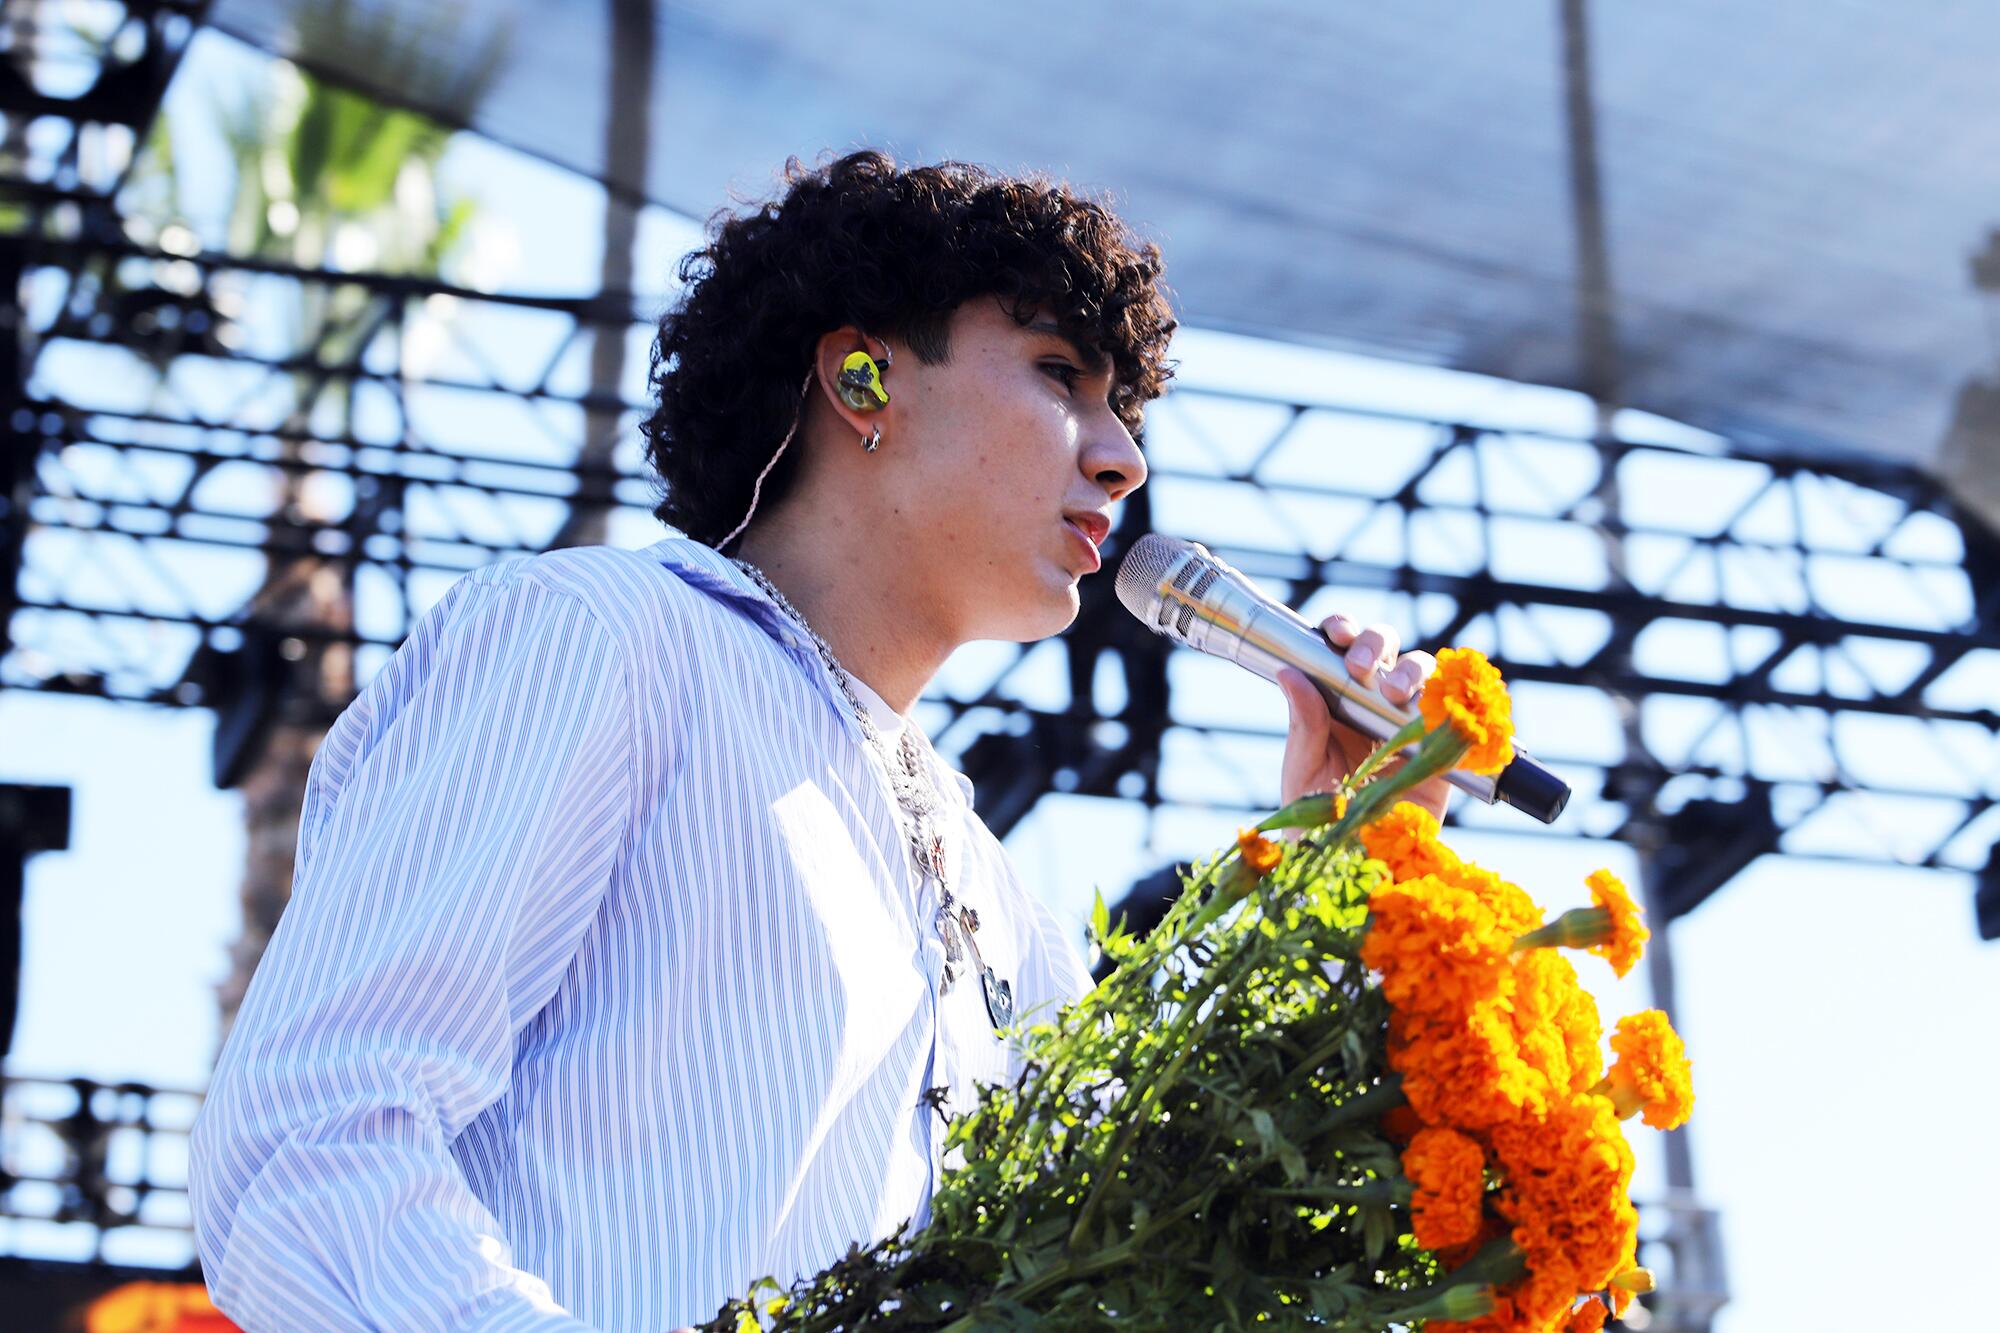 A man sings into a microphone while holding flowers